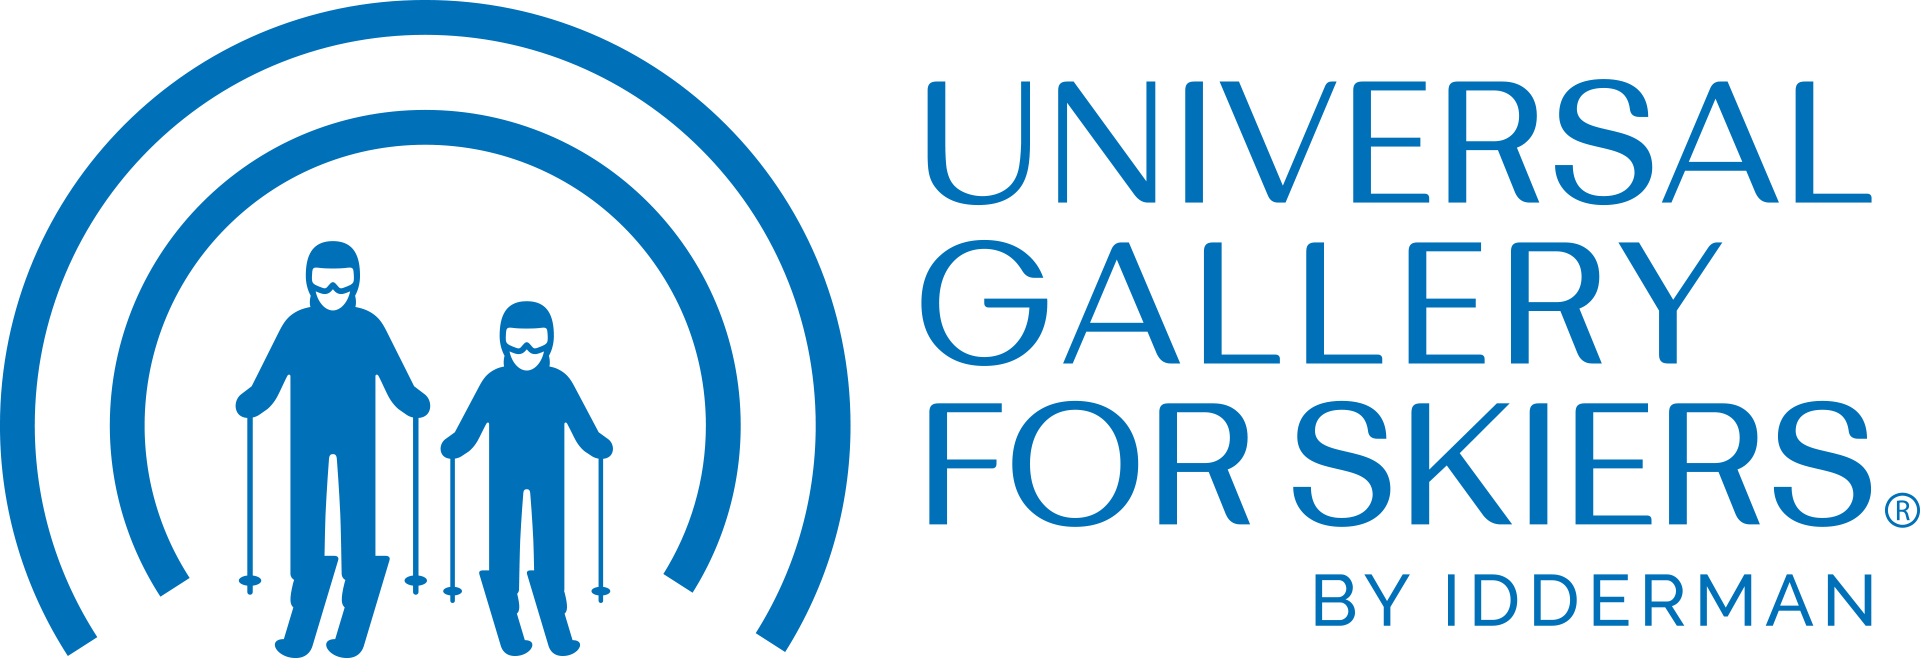 Universal Gallery For Skiers